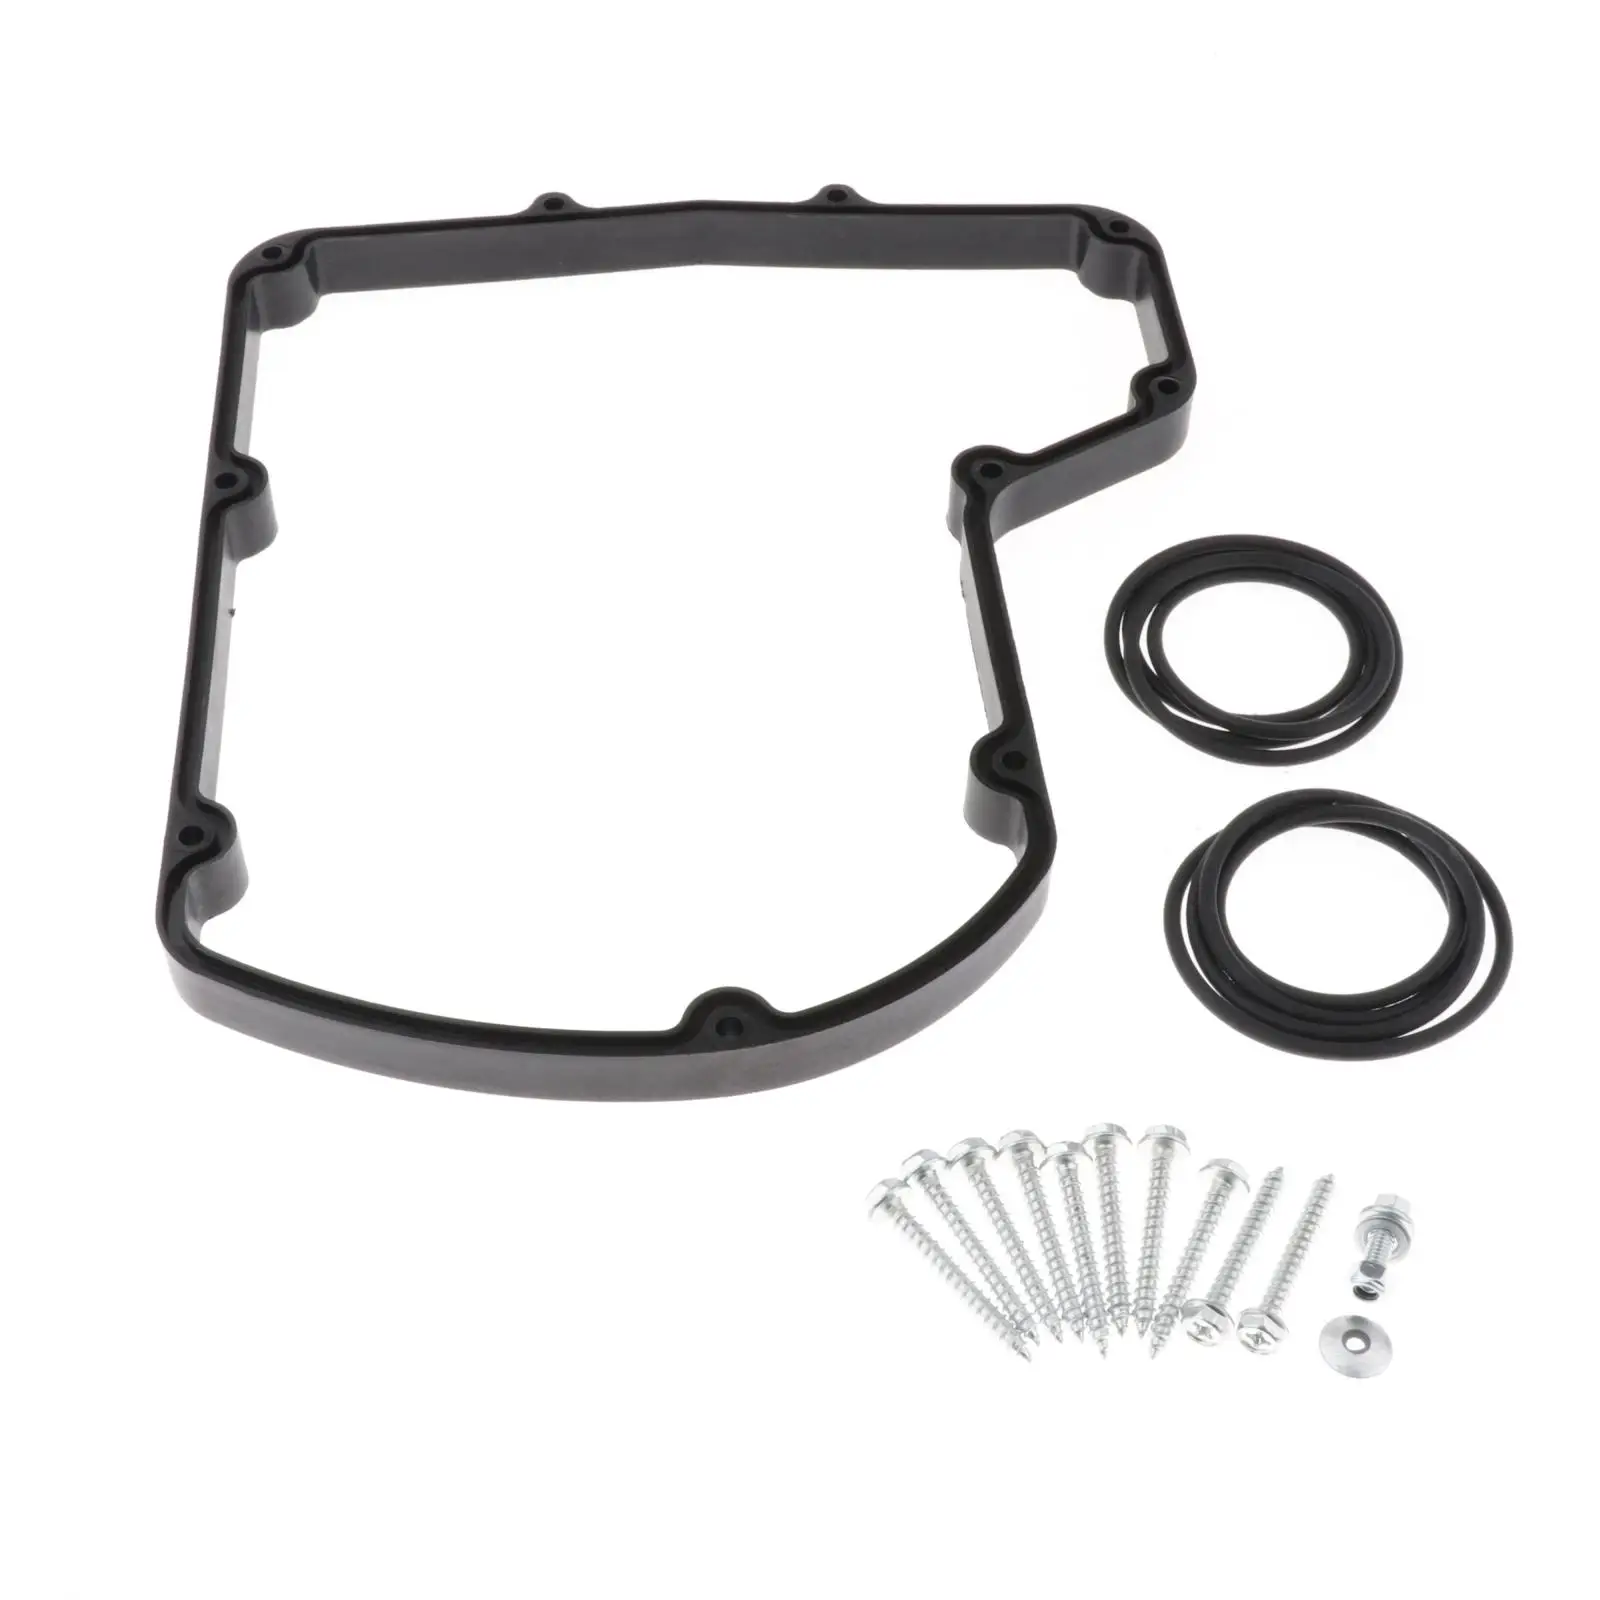 Replacement Intake Air Box Spacer Up To 10H.P Fit for Yamaha YXZ 1000R Parts High Performance